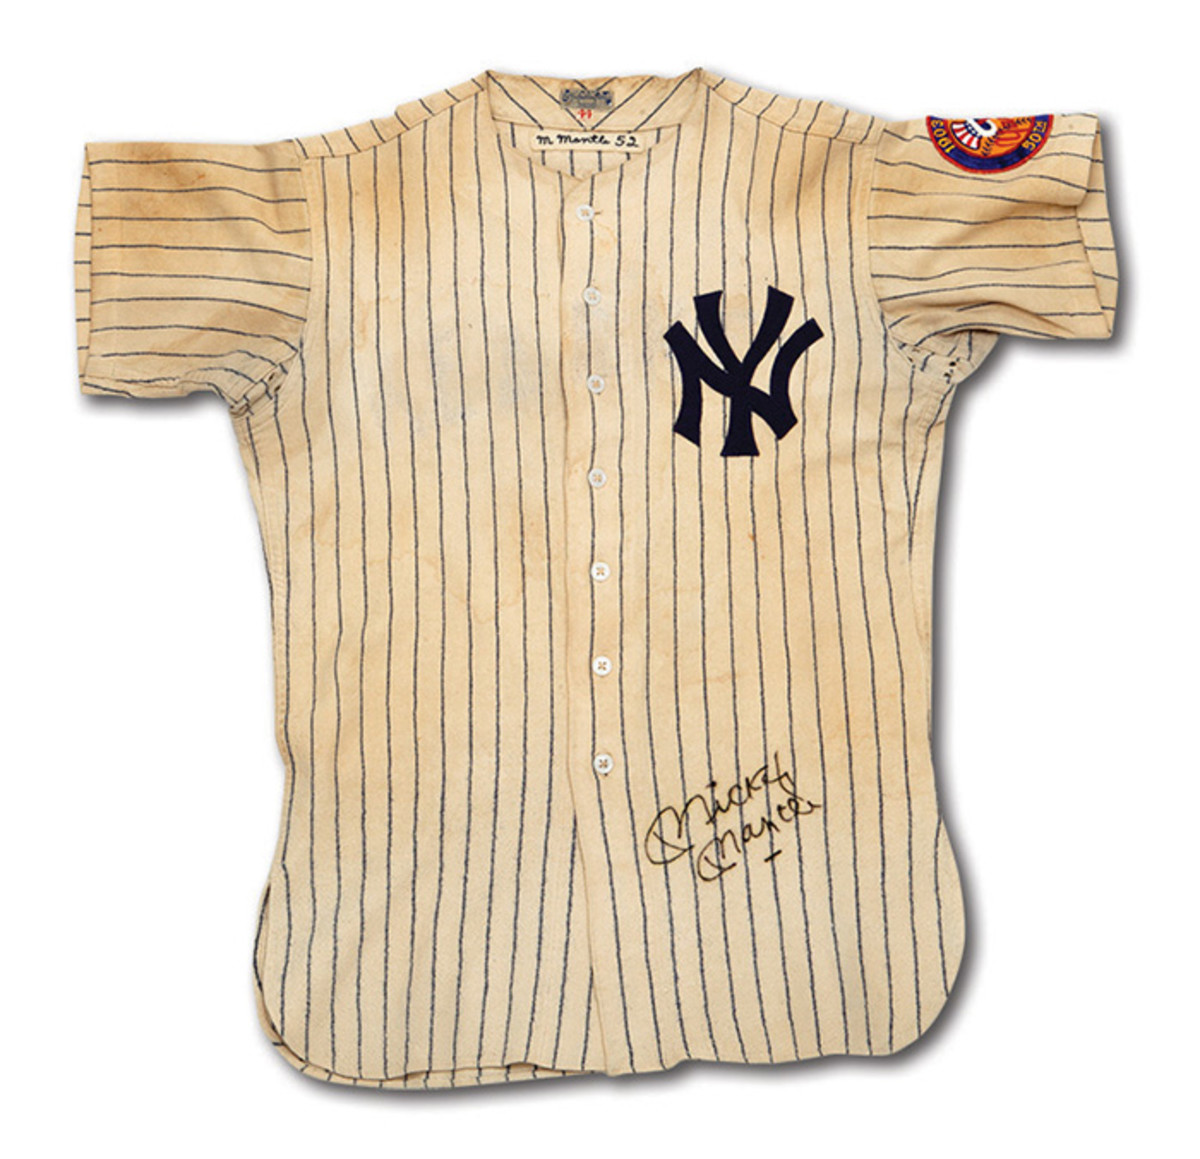 SCP Auctions to Features 1952 Mickey Mantle Jersey, 1950 Bat and 1956 POY  Award - Sports Collectors Digest